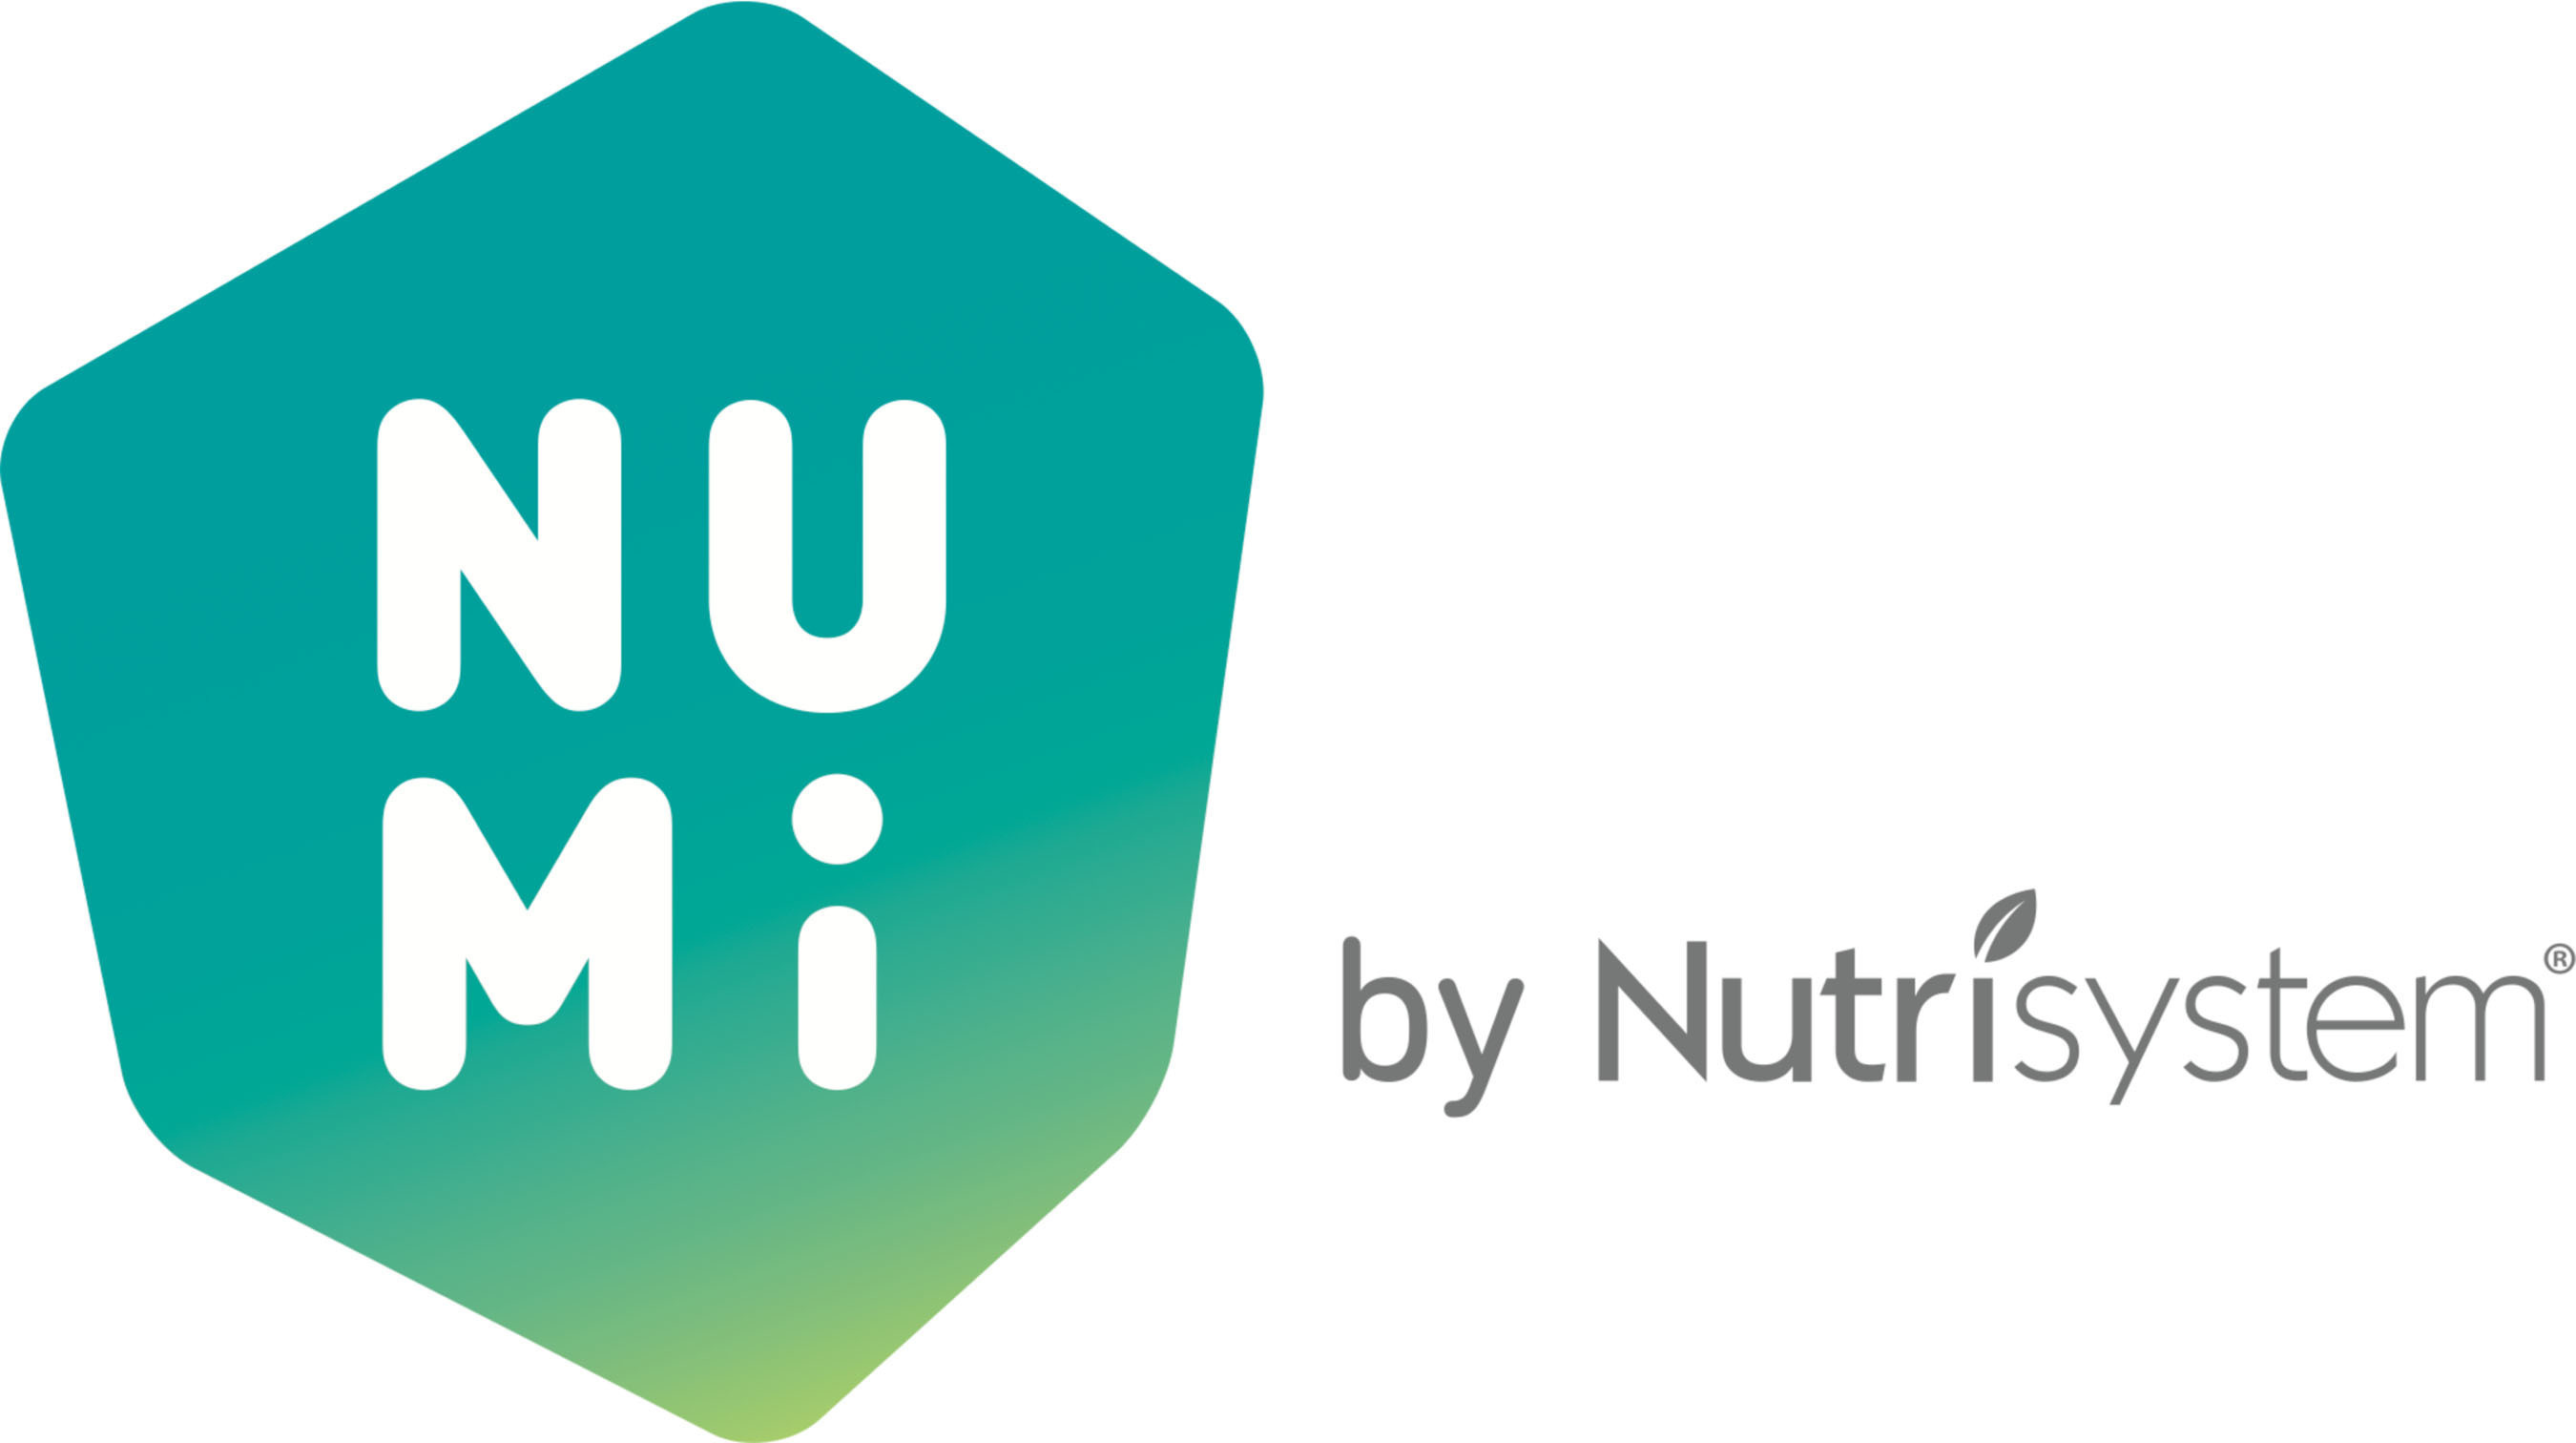 Nutrisystem announces the launch of NuMi(TM) by Nutrisystem, a flexible, new digital weight loss system for the do-it-yourself dieter as well as dieters transitioning from a structured meal plan or looking for a post-diet weight maintenance program. NuMi offers an interactive solution for the nutritional, emotional and physical components of a weight loss journey.